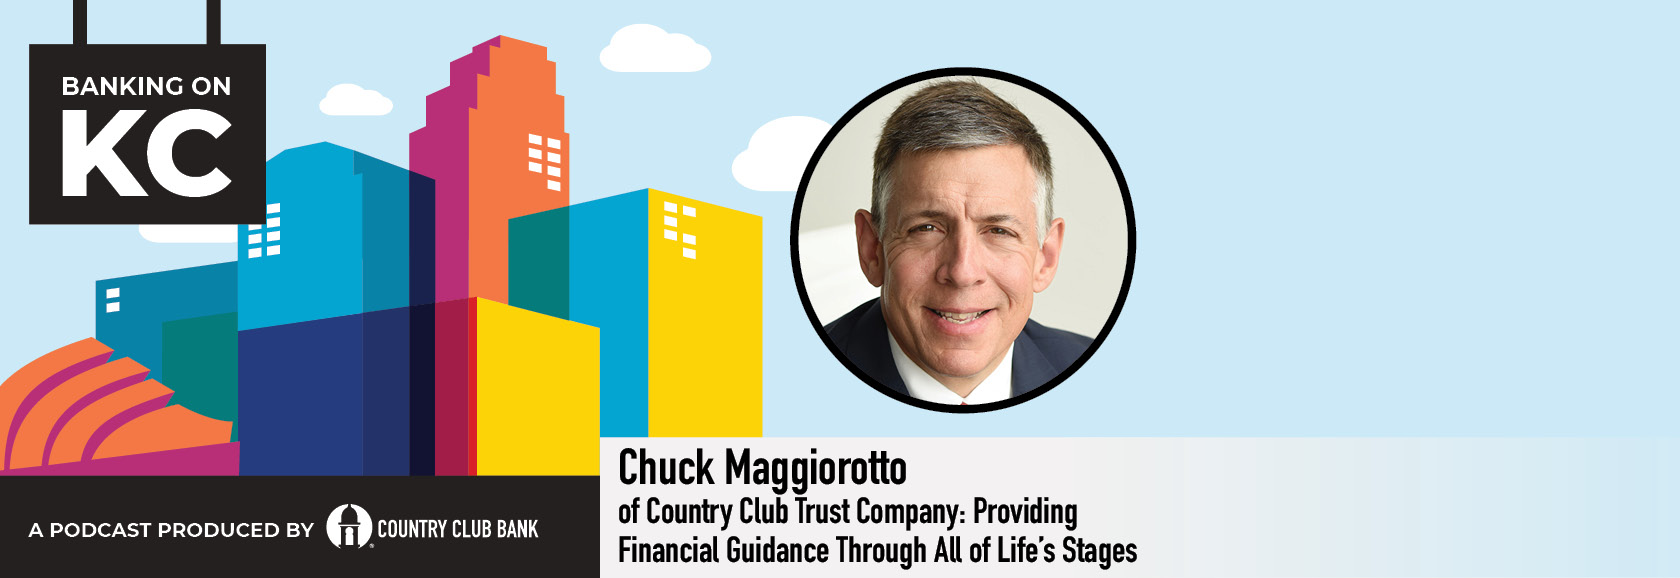 Banking on KC – Chuck Maggiorotto of Country Club Trust Company